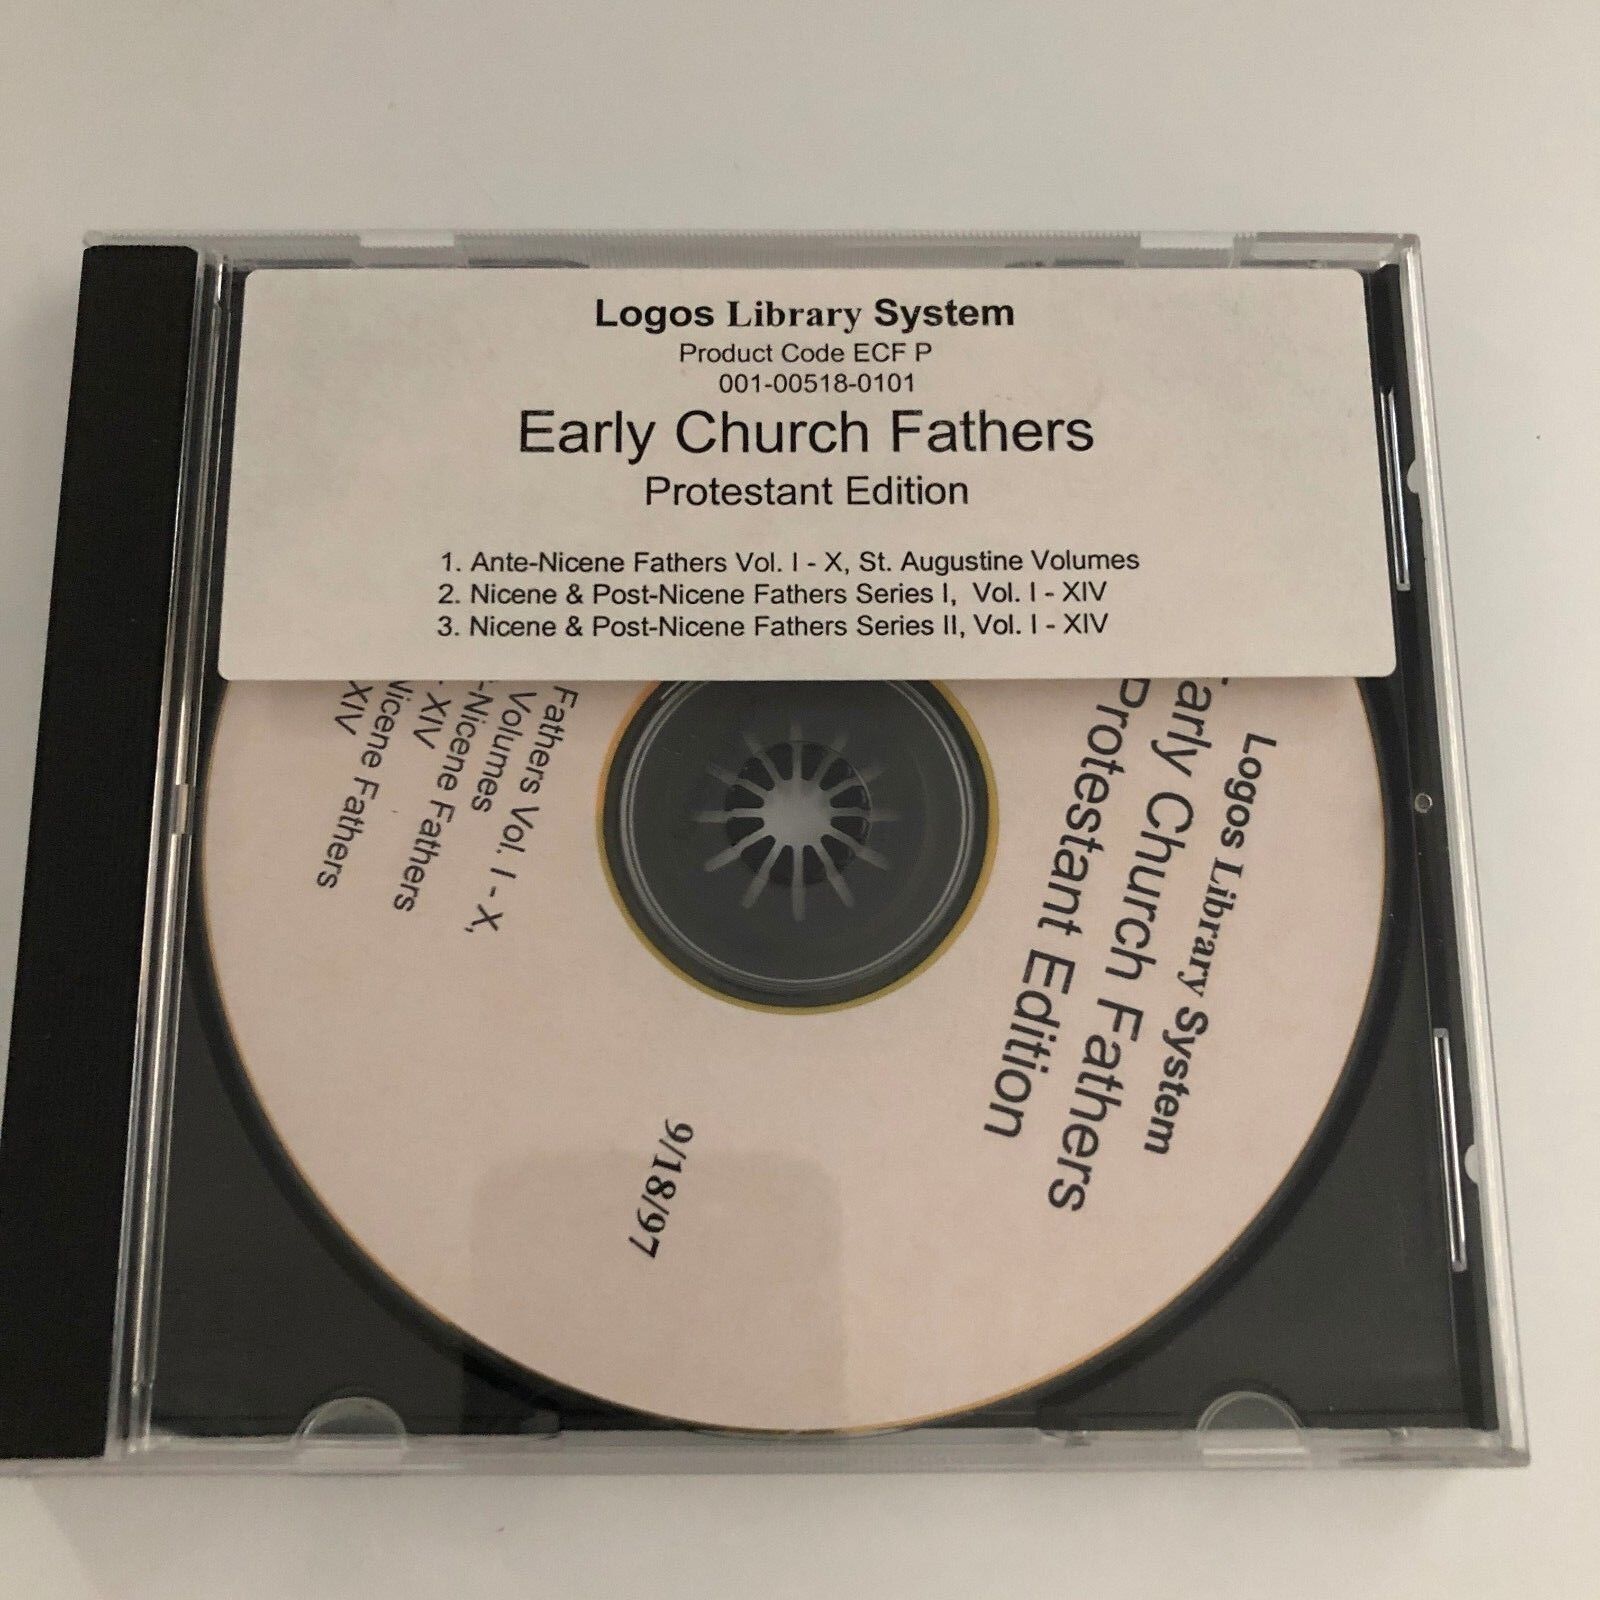 Early Church Fathers Protestant Edition on CD-Rom Logos Library System